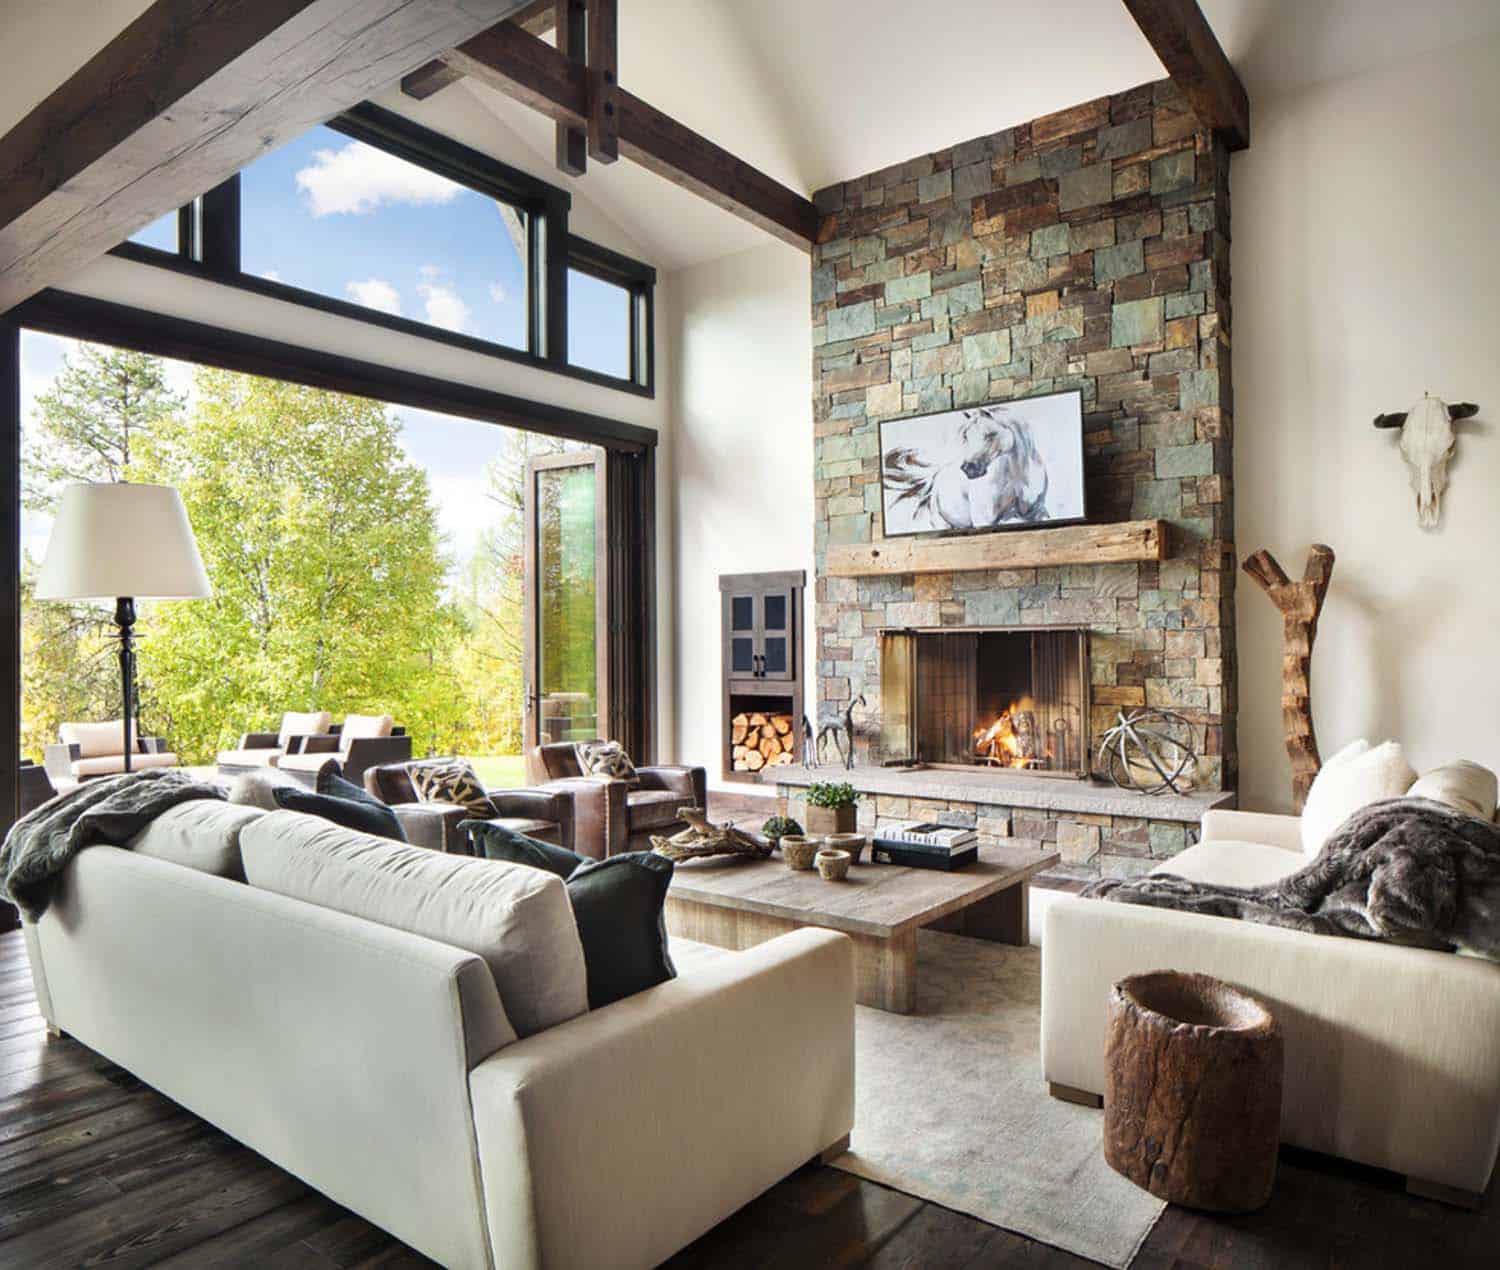 Rustic-modern dwelling nestled in the northern Rocky Mountains